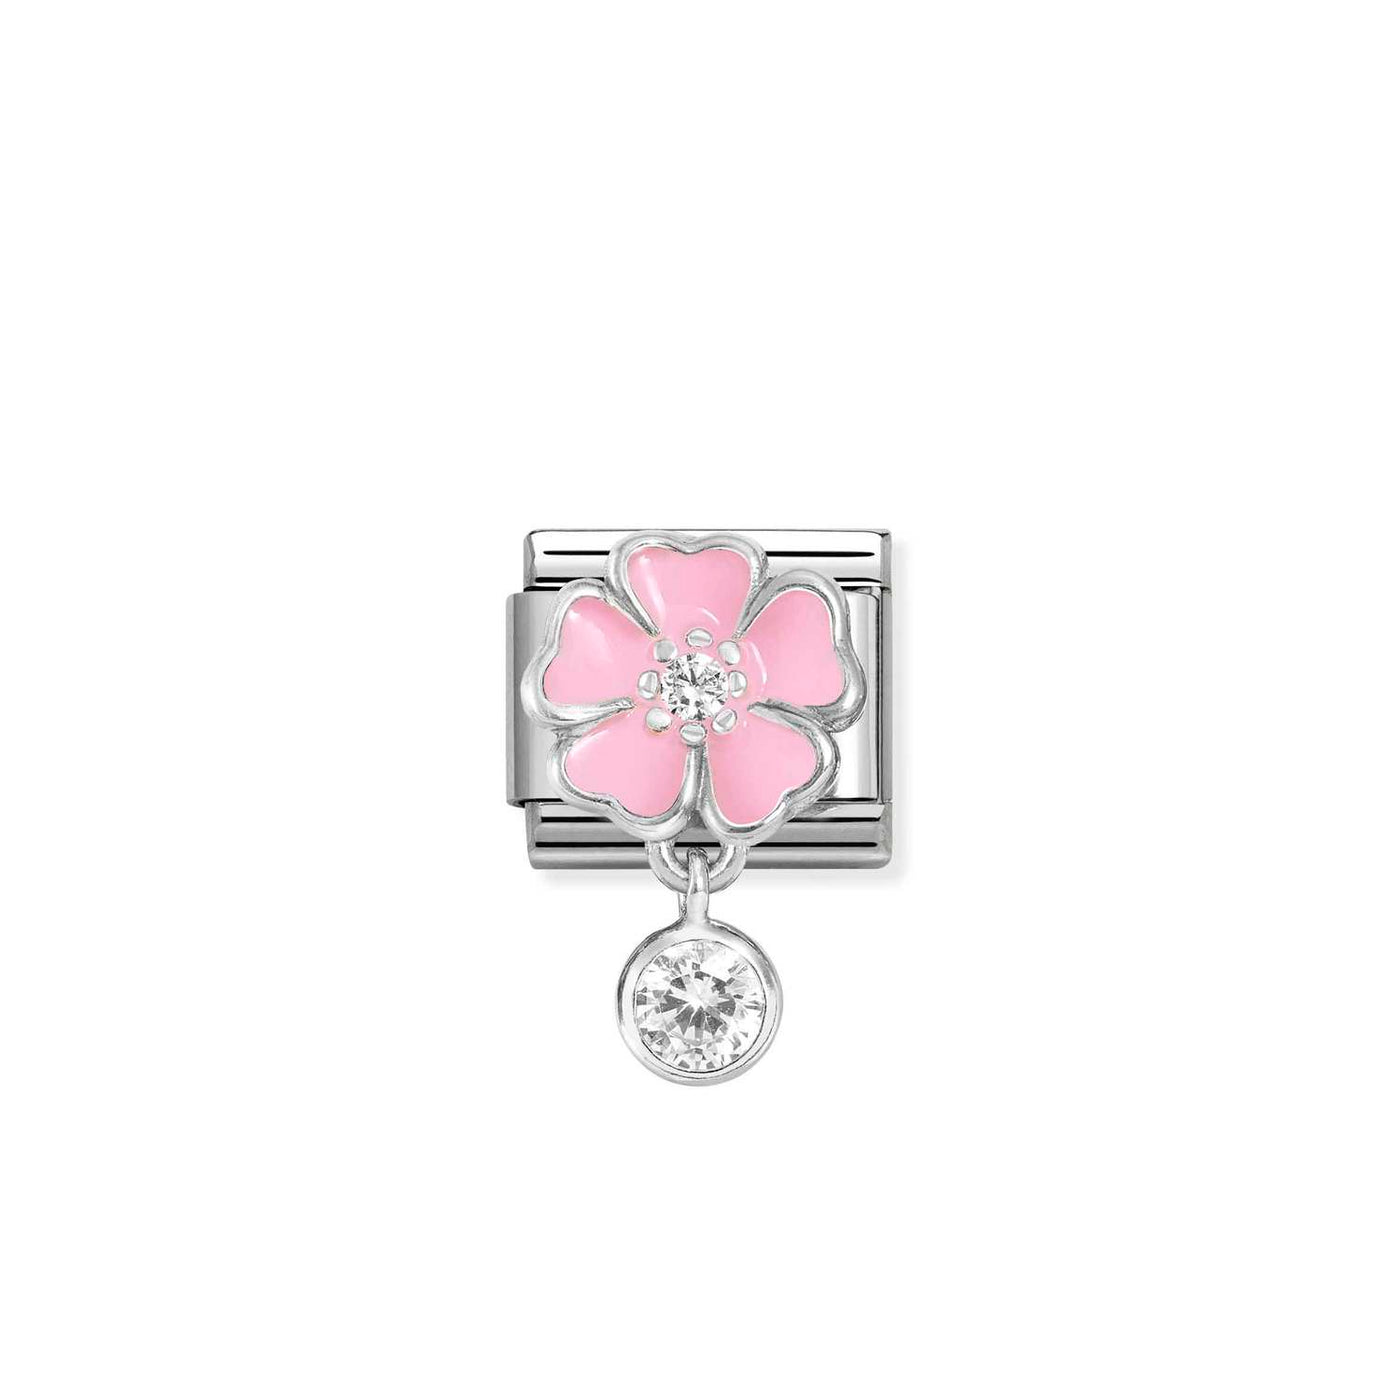 Nomination Classic Silver Zirconia Pink Flower with Round Drop Charm